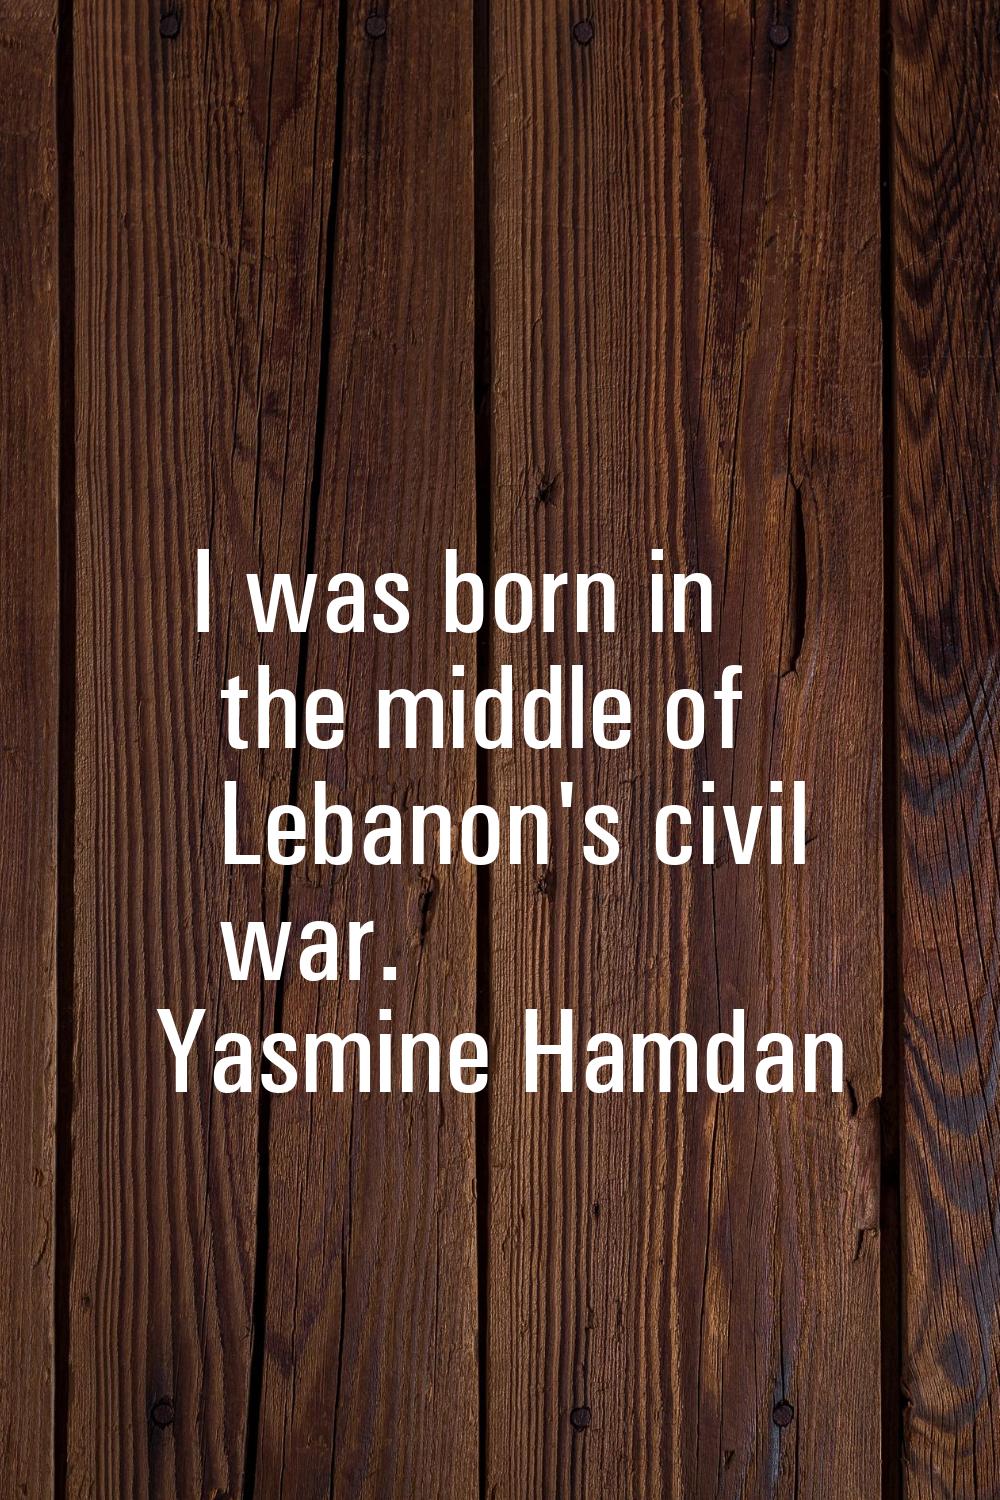 I was born in the middle of Lebanon's civil war.